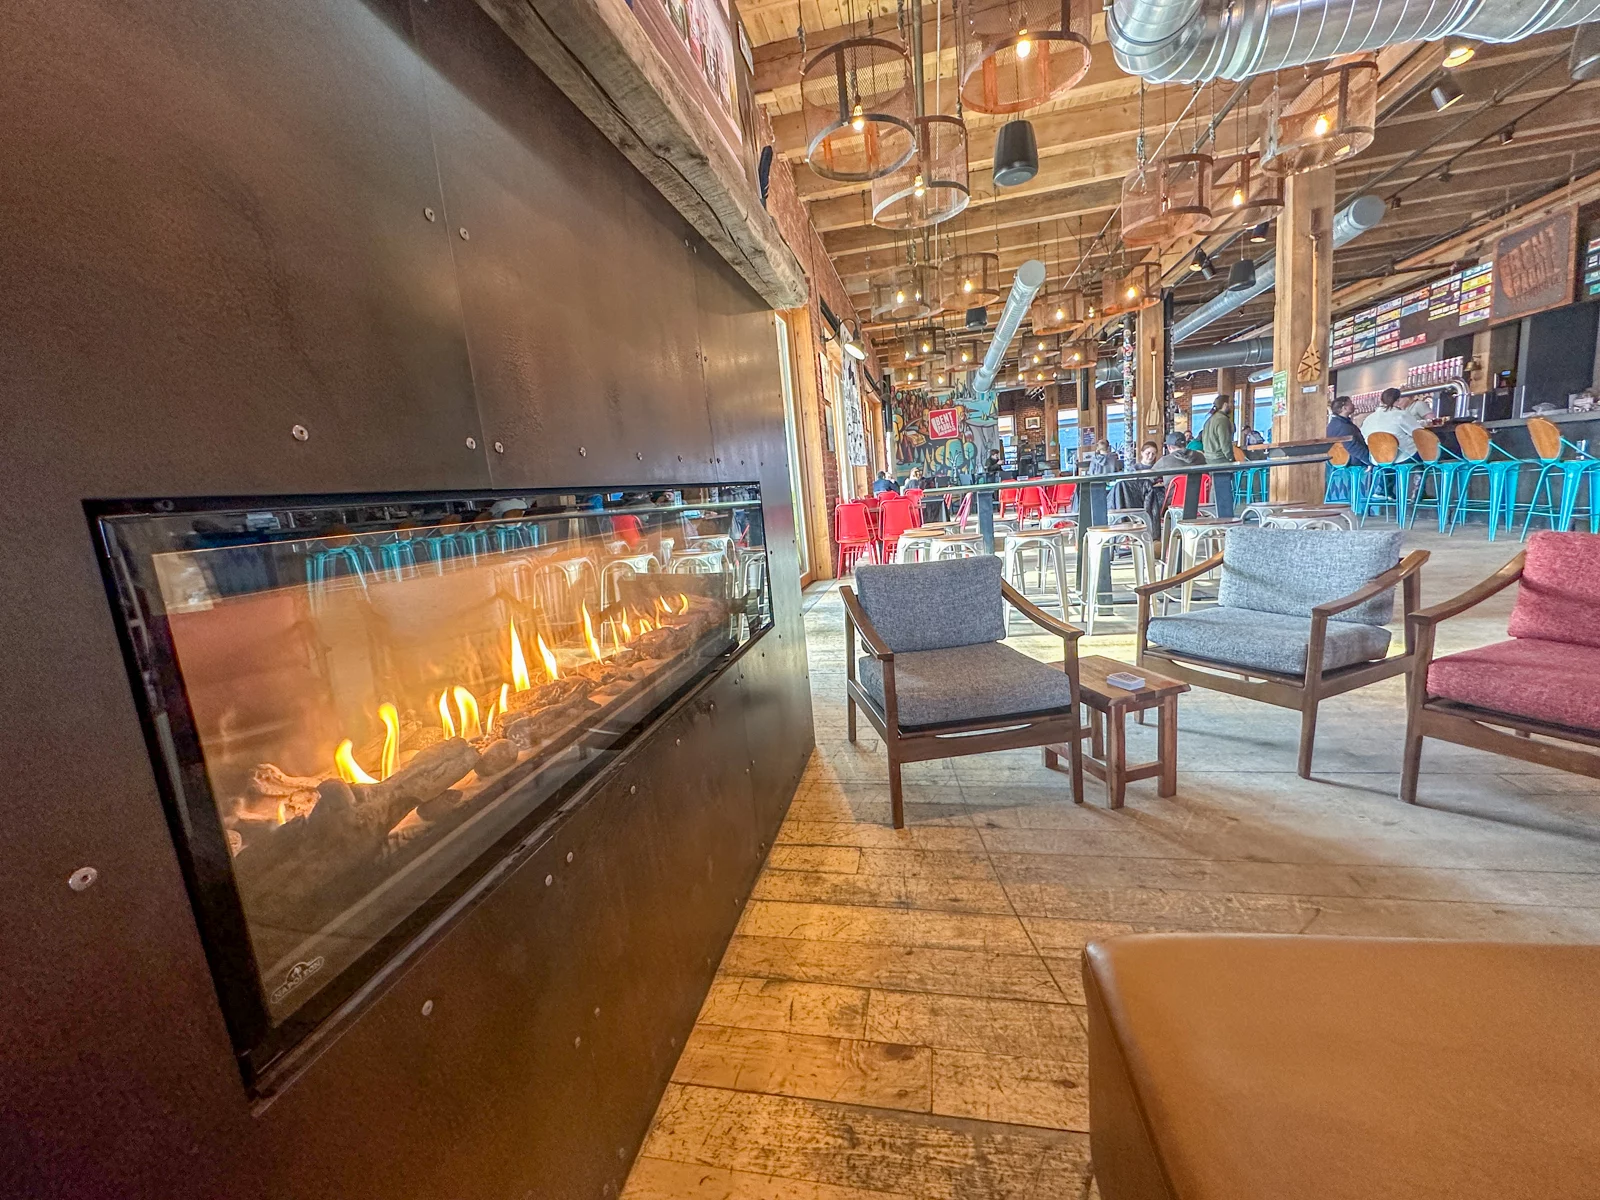 Fireplace Seating at Bent Paddle Brewing